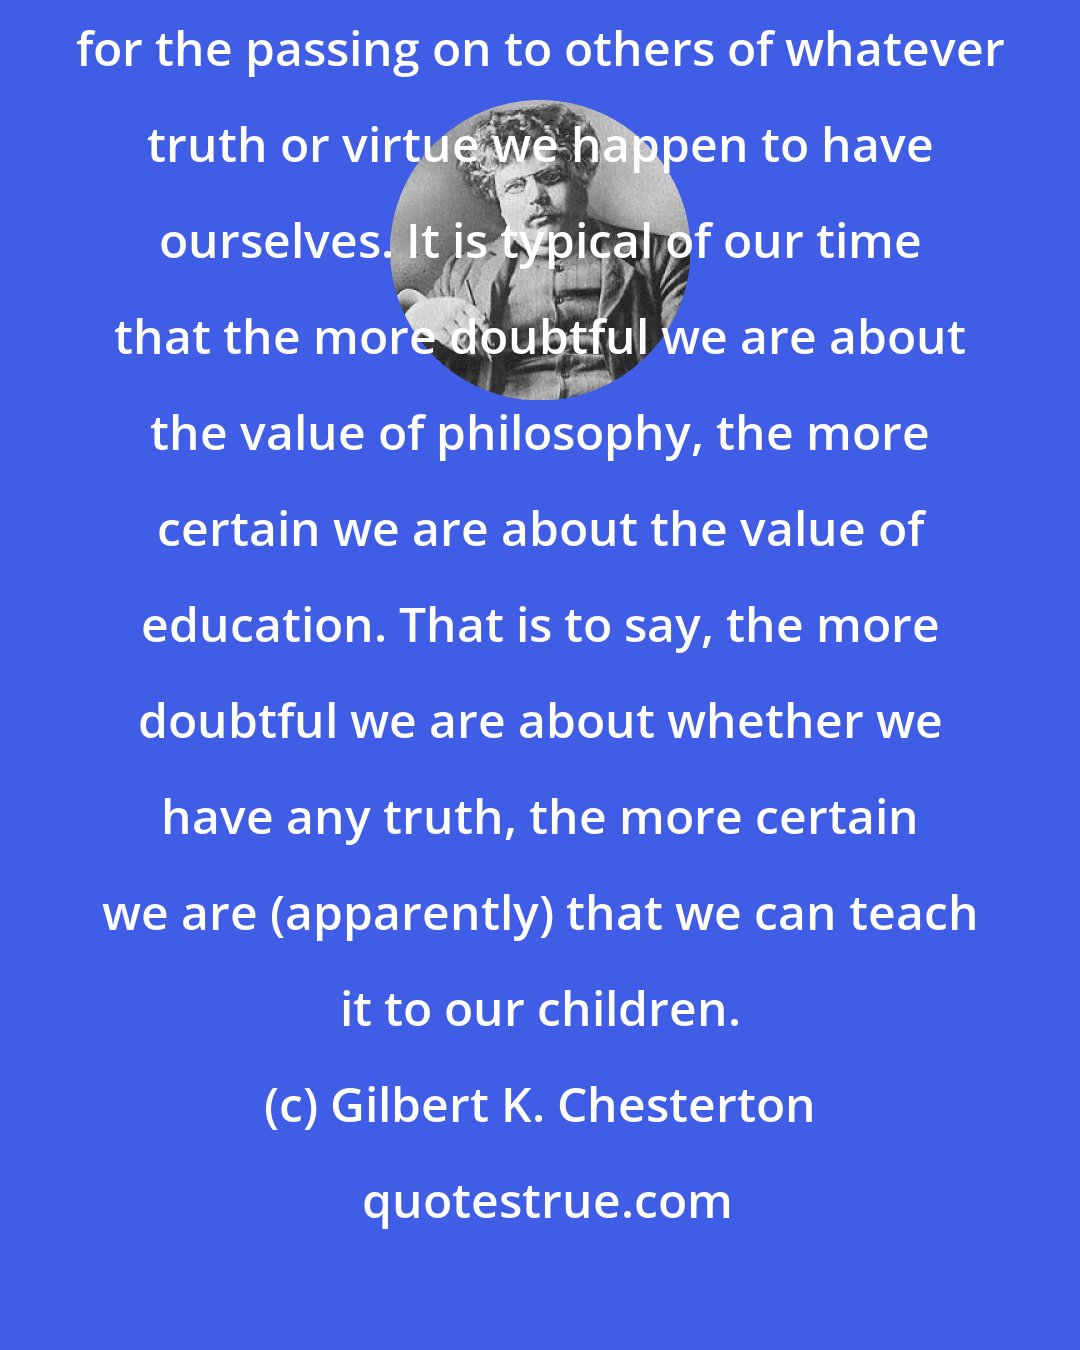 Gilbert K. Chesterton: There is no such thing as education. The thing is merely a loose phrase for the passing on to others of whatever truth or virtue we happen to have ourselves. It is typical of our time that the more doubtful we are about the value of philosophy, the more certain we are about the value of education. That is to say, the more doubtful we are about whether we have any truth, the more certain we are (apparently) that we can teach it to our children.